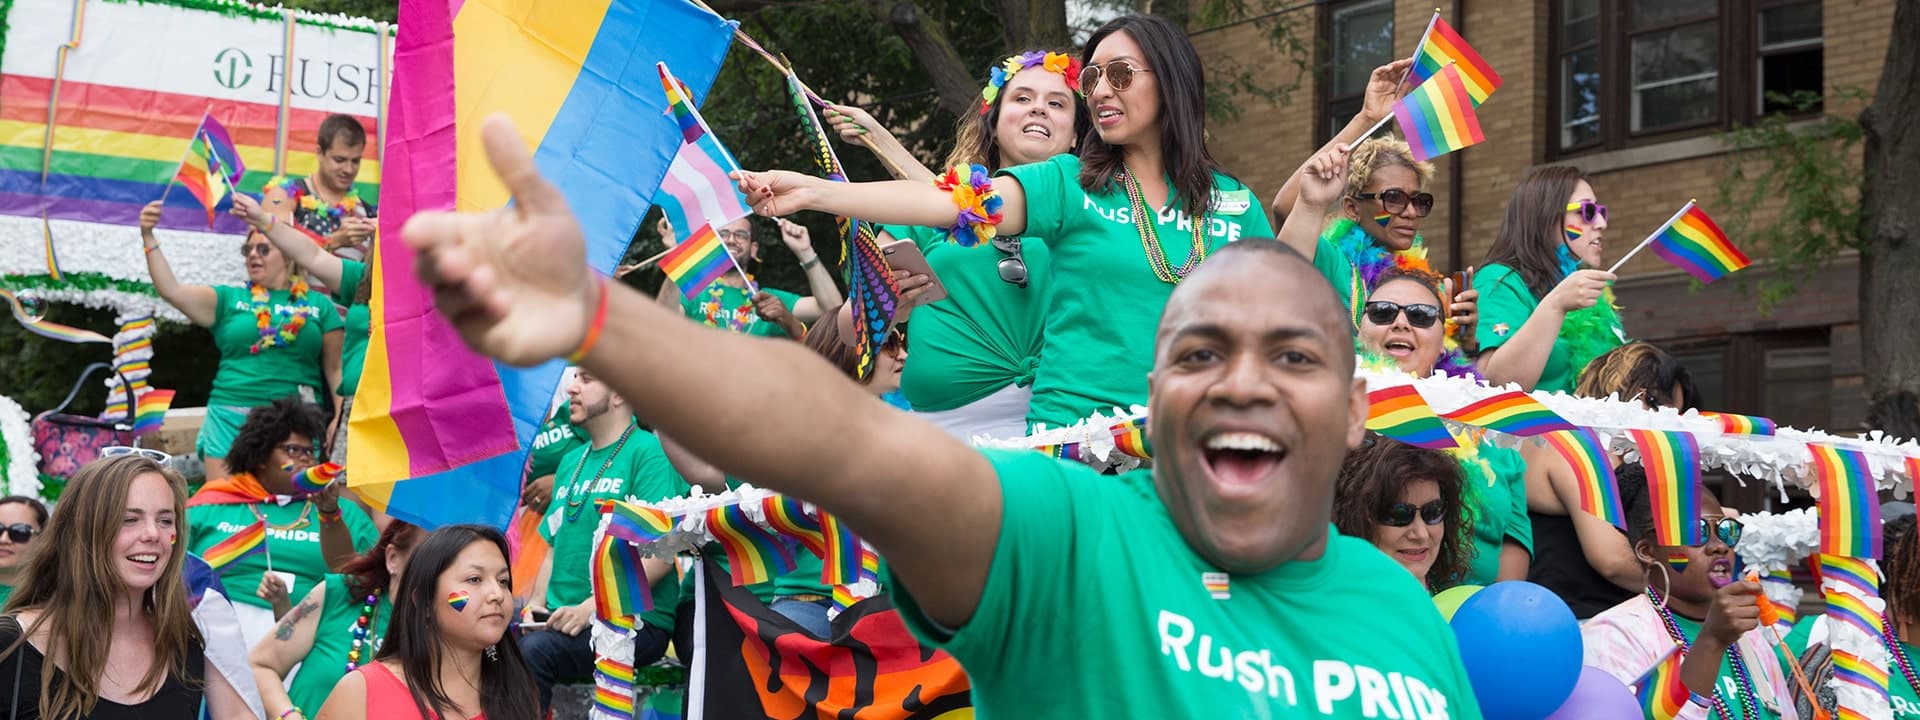 People wearing green RUSH shirts ride a parade float waving rainbow flags. A man in the foreground opens his arm in a welcoming gesture.